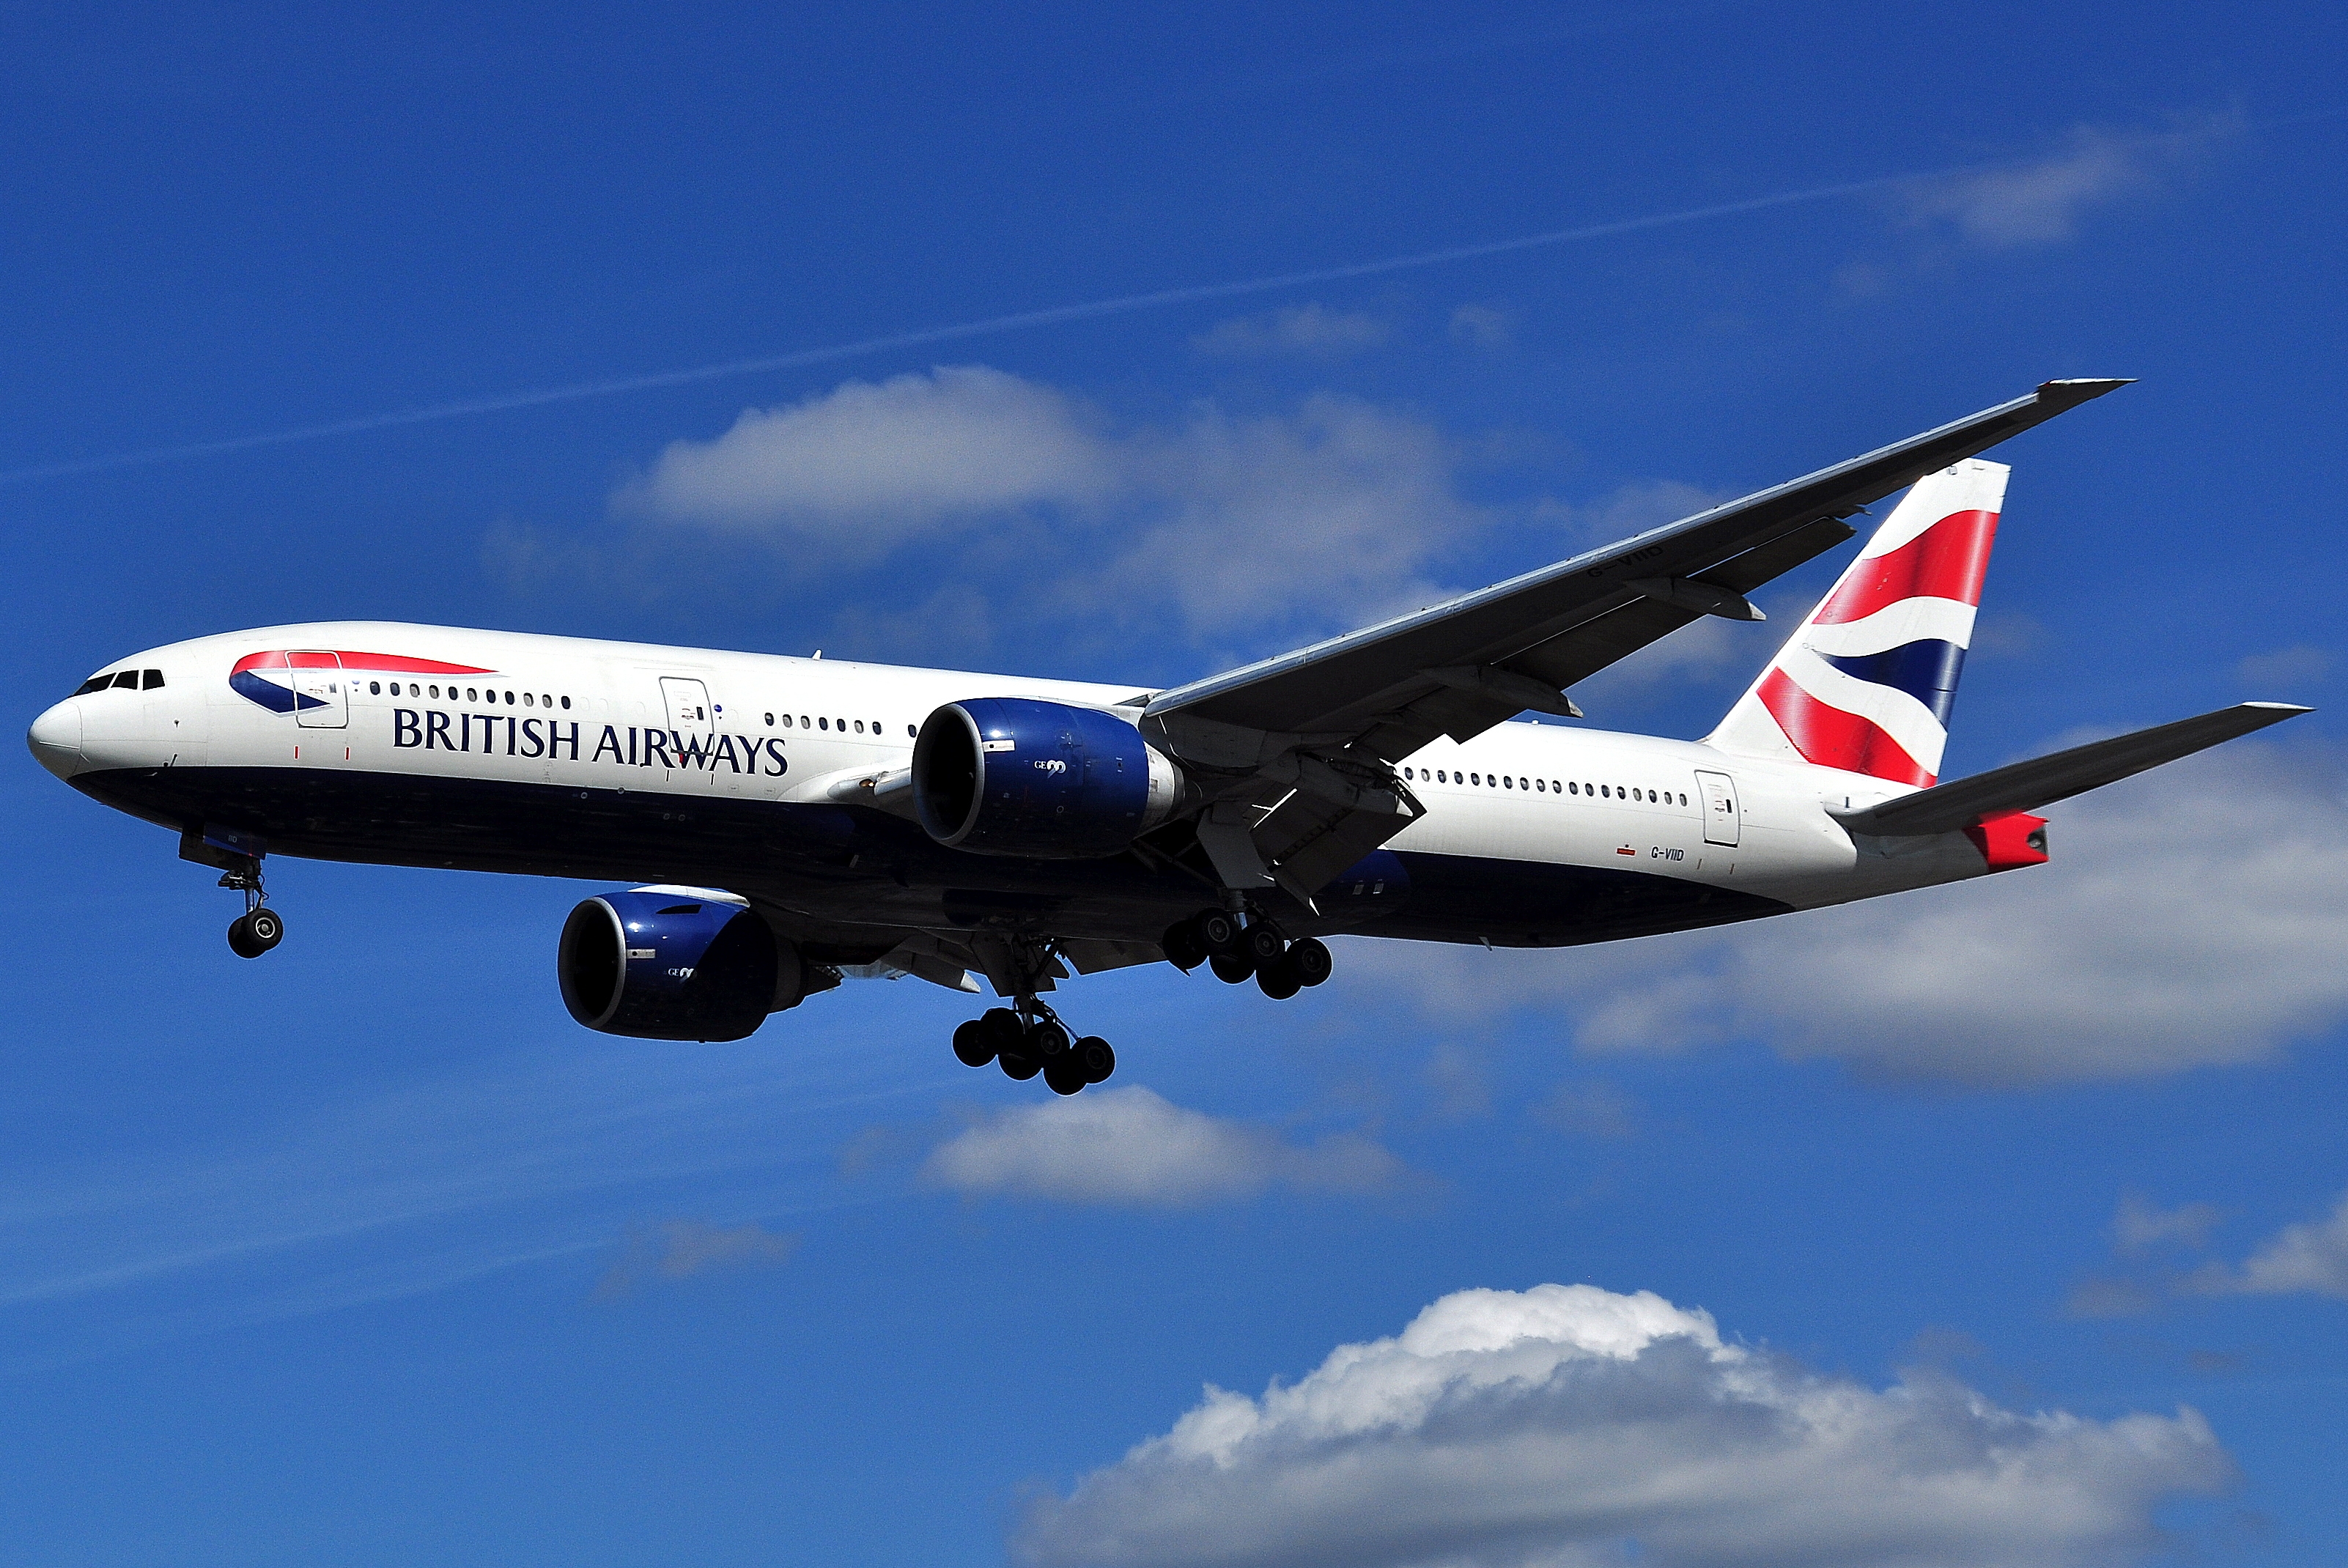 British Airways just audited my account and removed my ...
